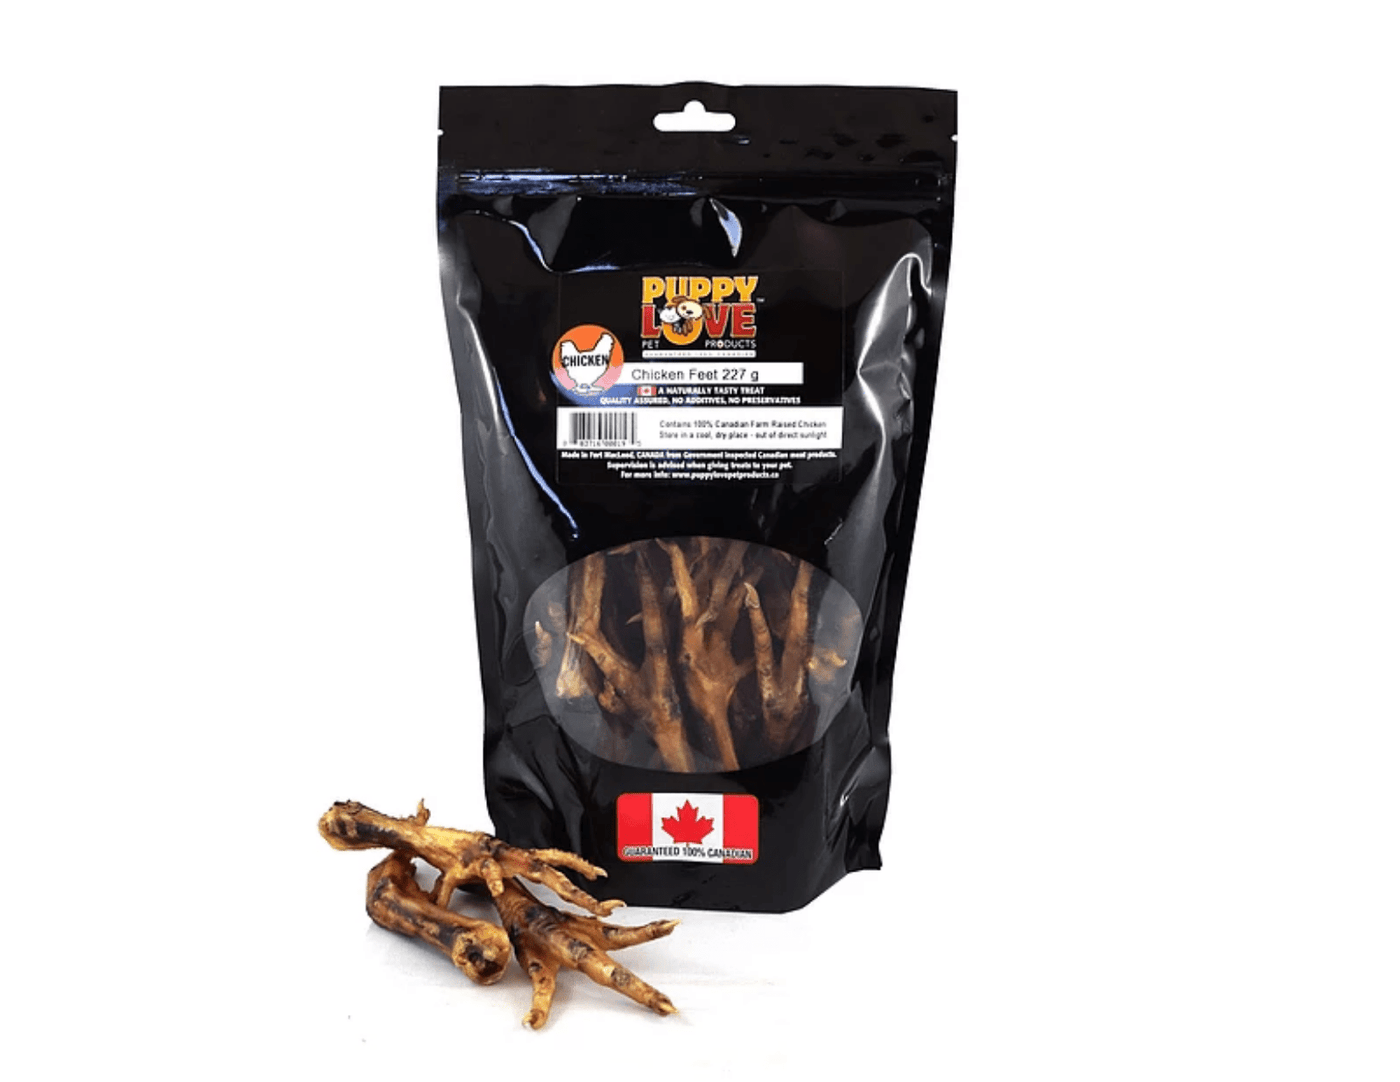 Puppy Love - Chicken Feet 227g/8 oz. for Cats and Dogs - PetToba-Puppy Love